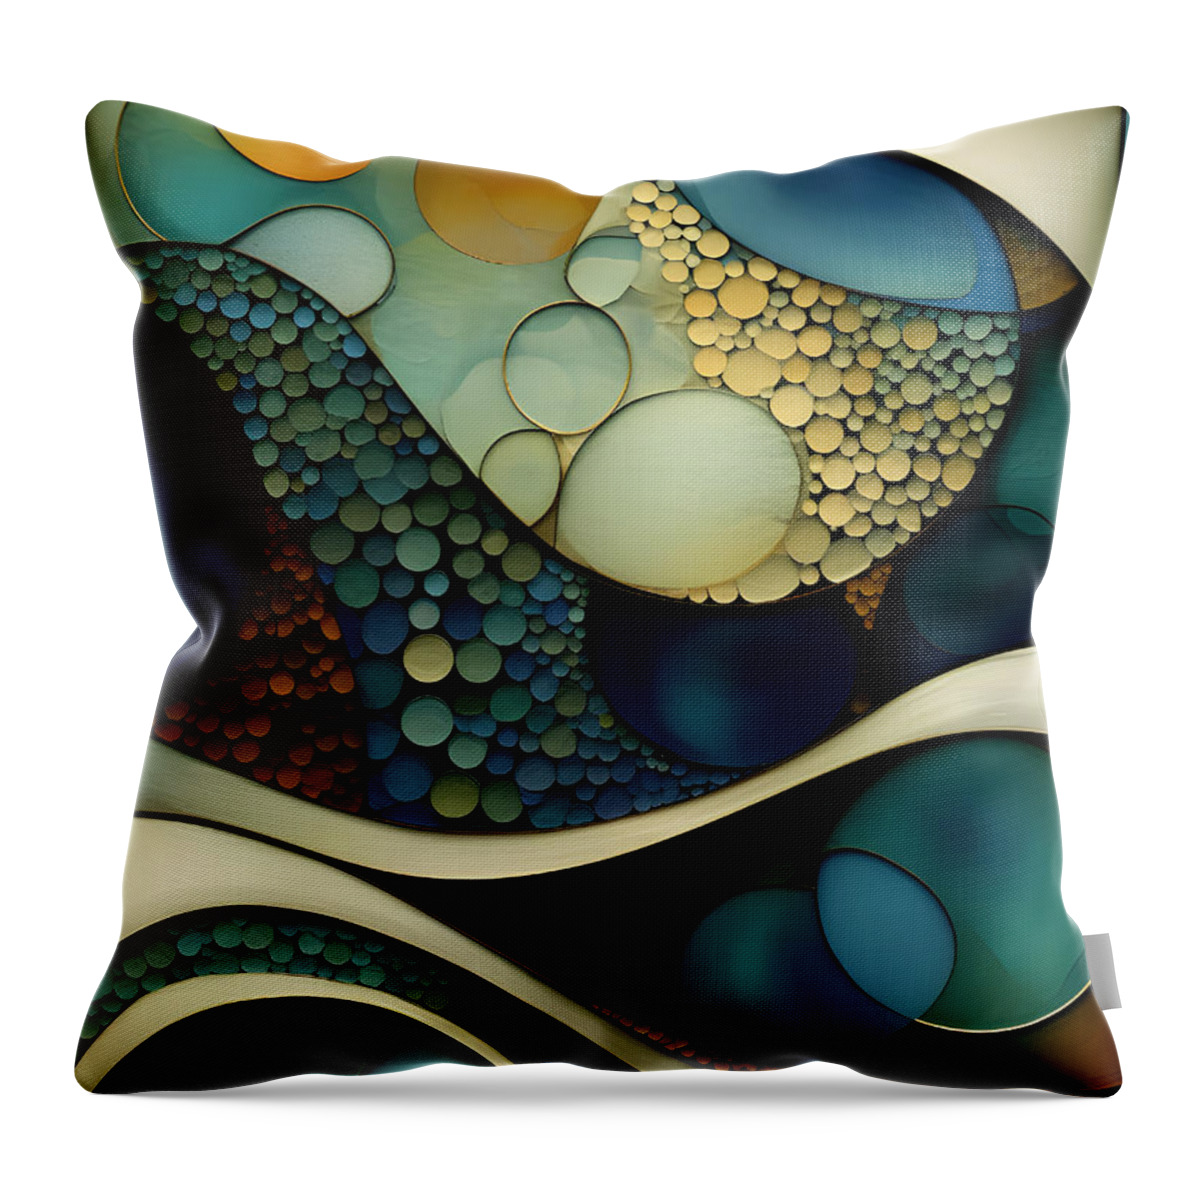 Digital Art Throw Pillow featuring the digital art Layered Landscapes 01 by Amanda Moore